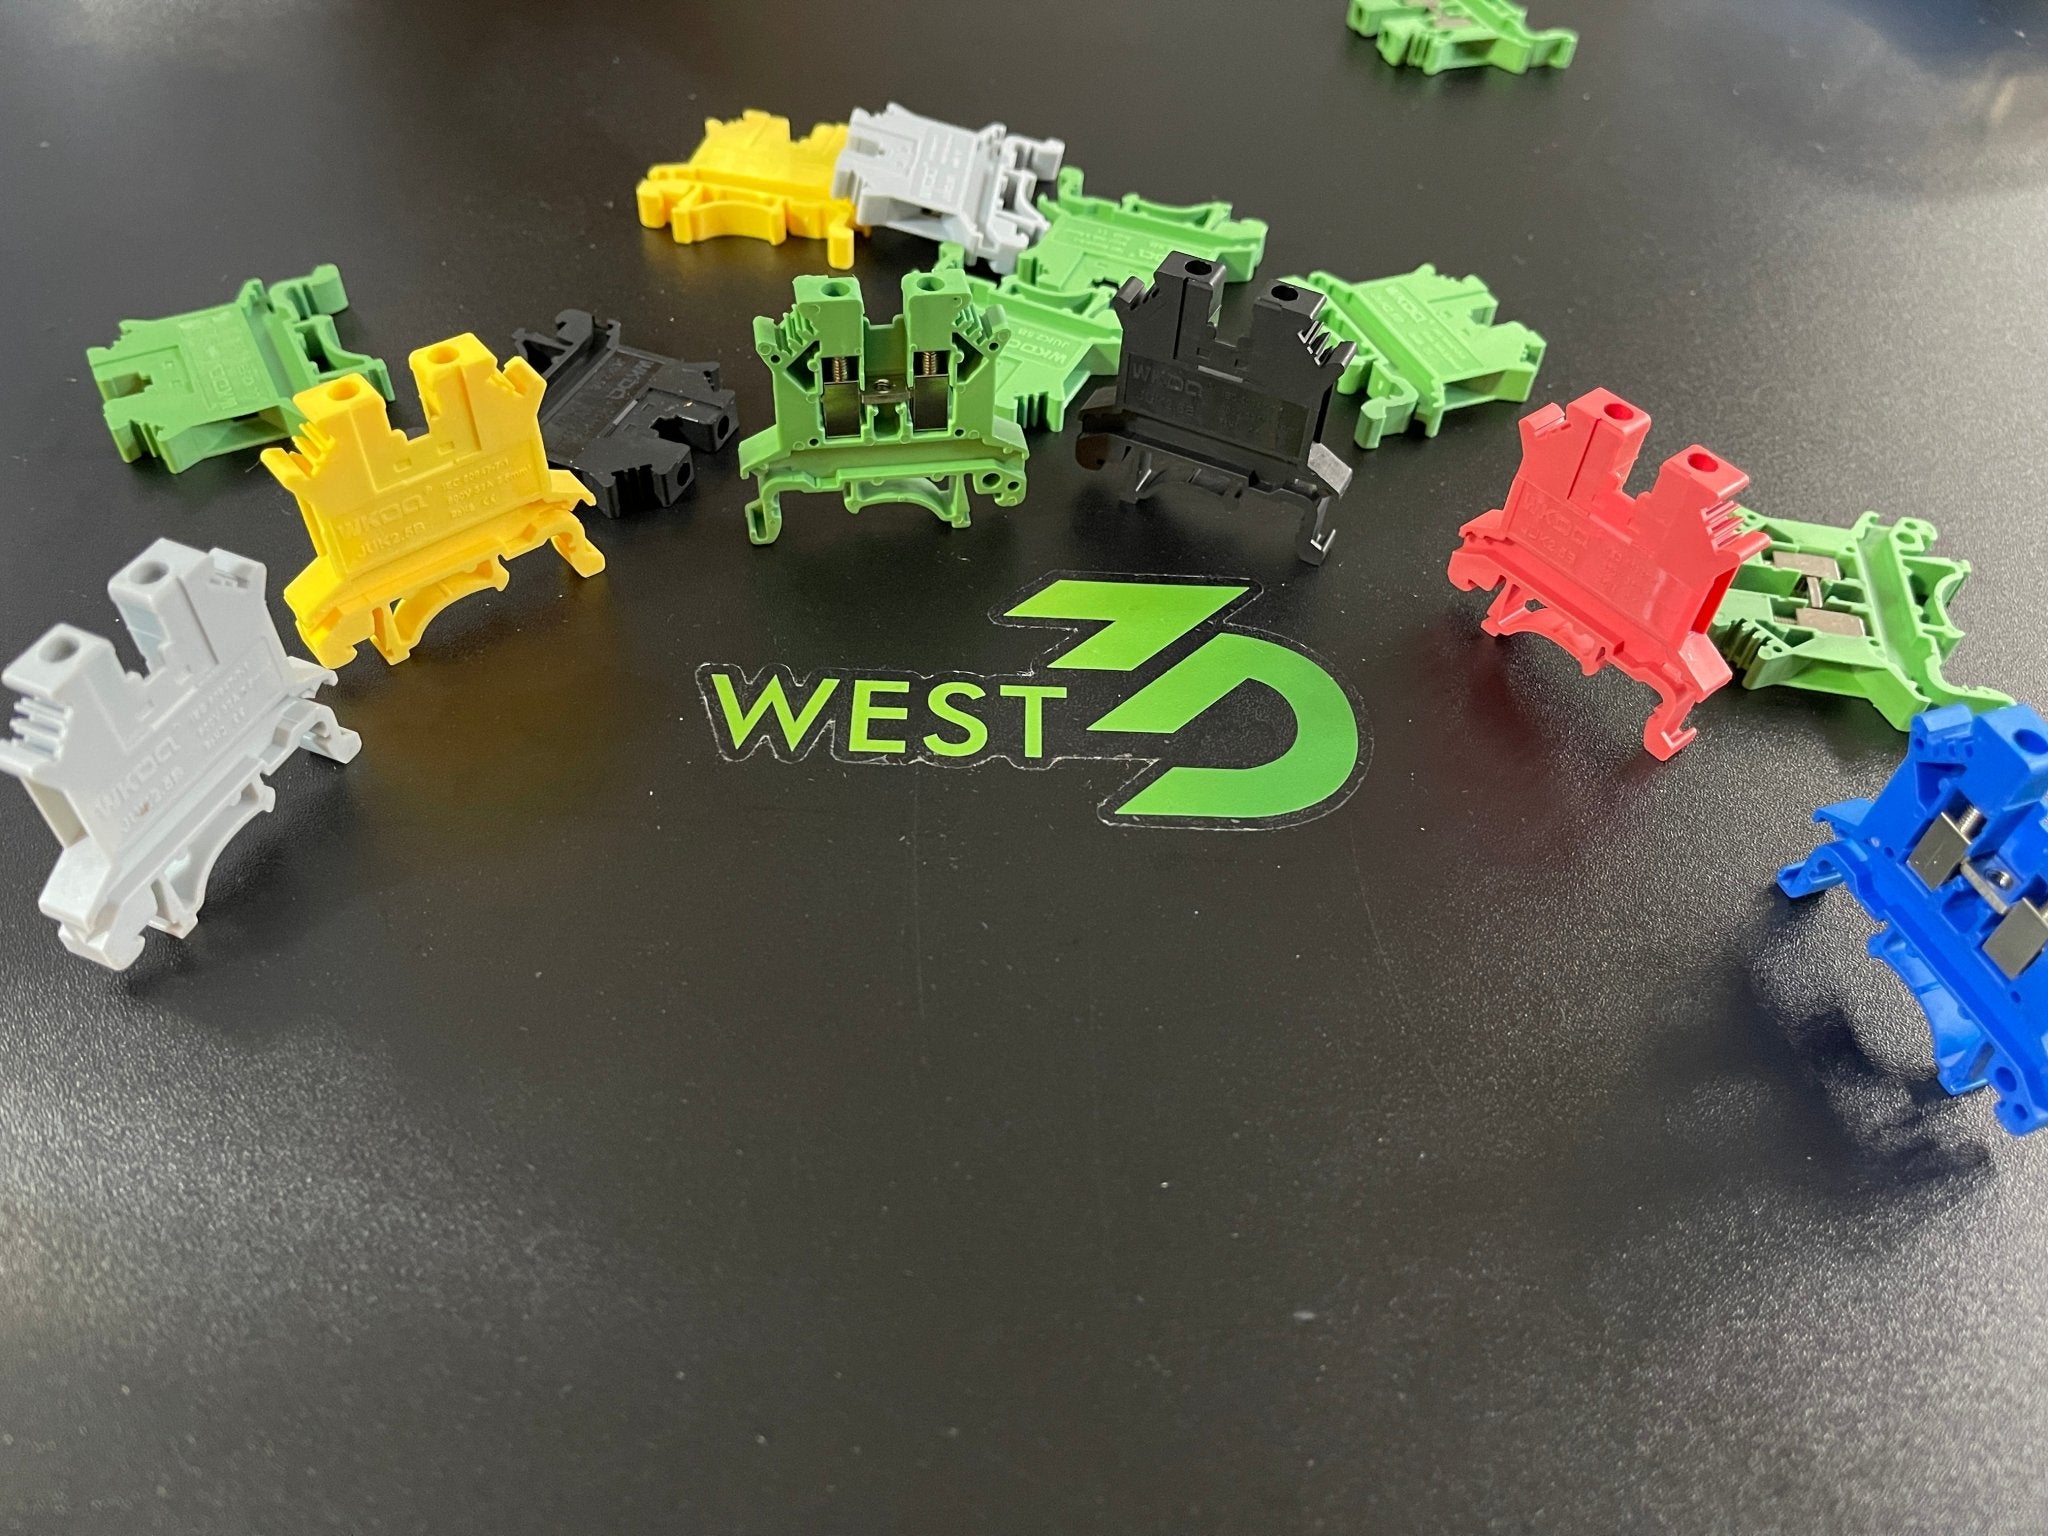 Wire Din Rail Terminal Block x1 Wire Cable Connectors - West3D Printing - Wonkedo Contact